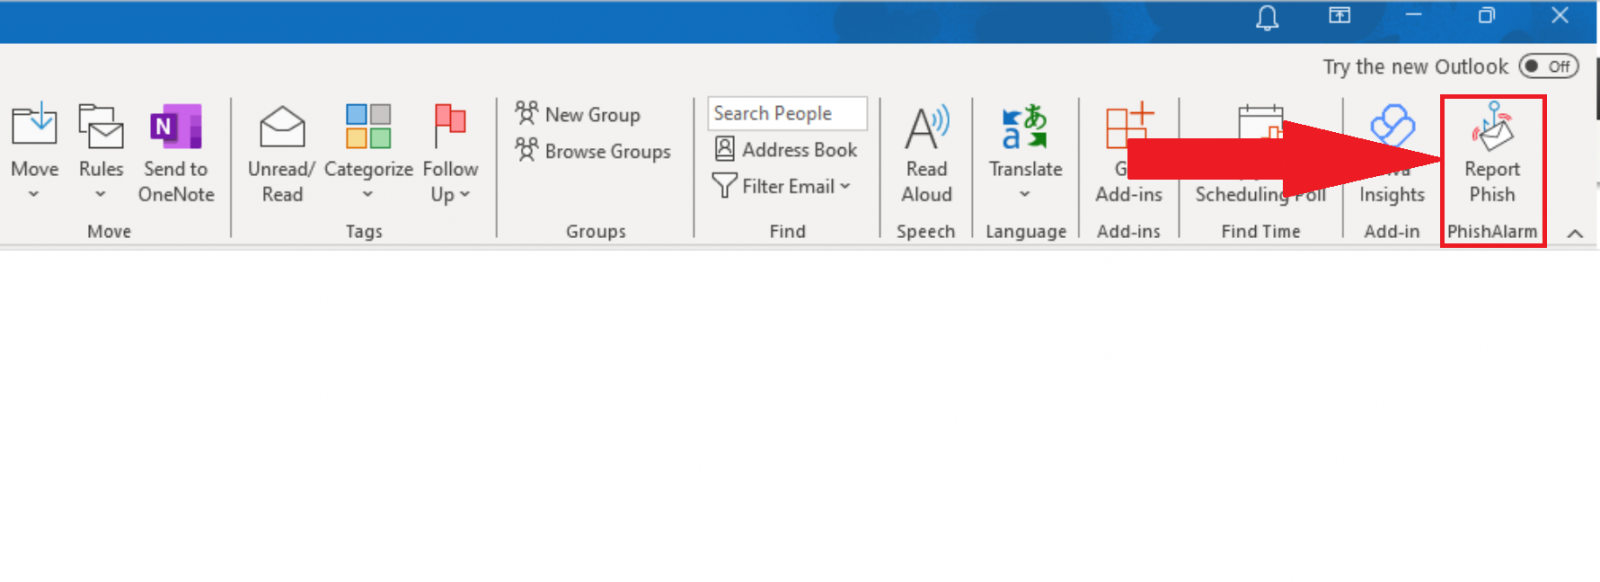 Image shows the top ribbon of an Outlook inbox